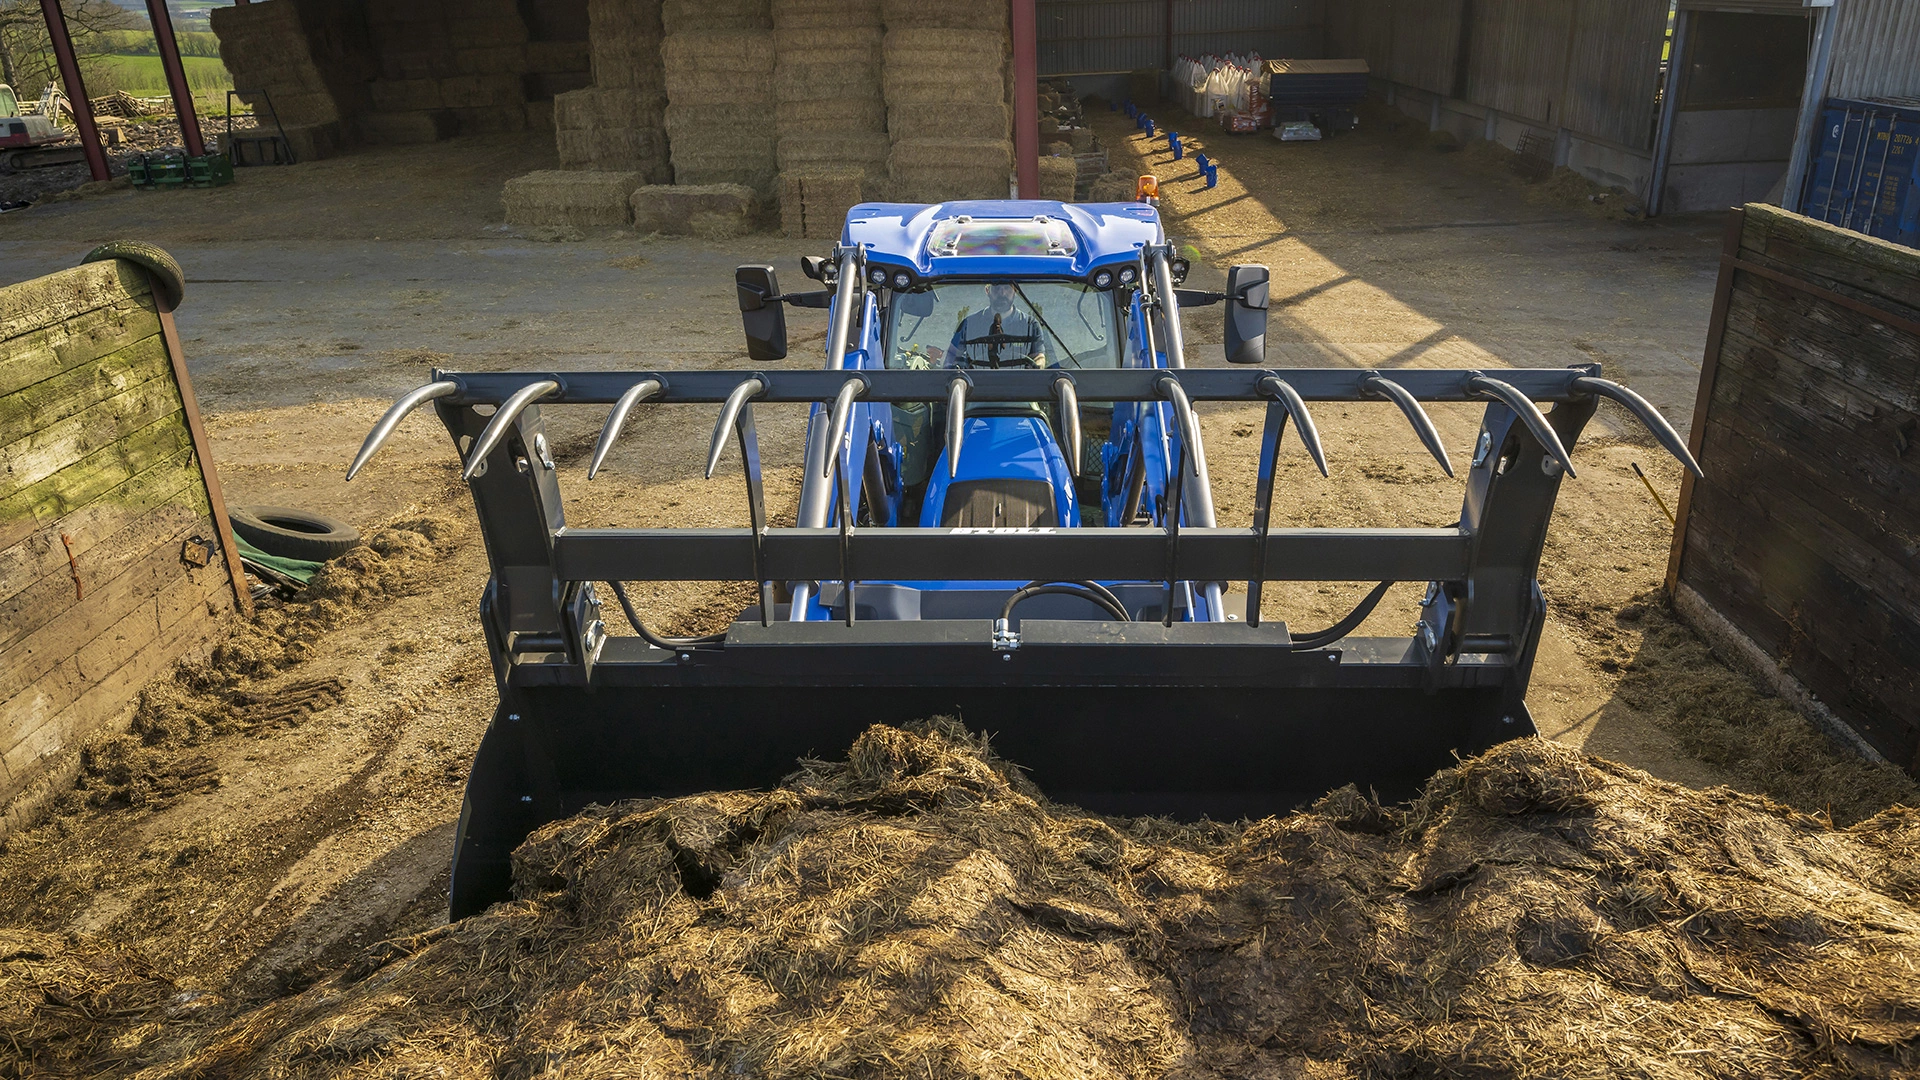 Front loader attachment on a New Holland tractor maneuvering in a barnyard.